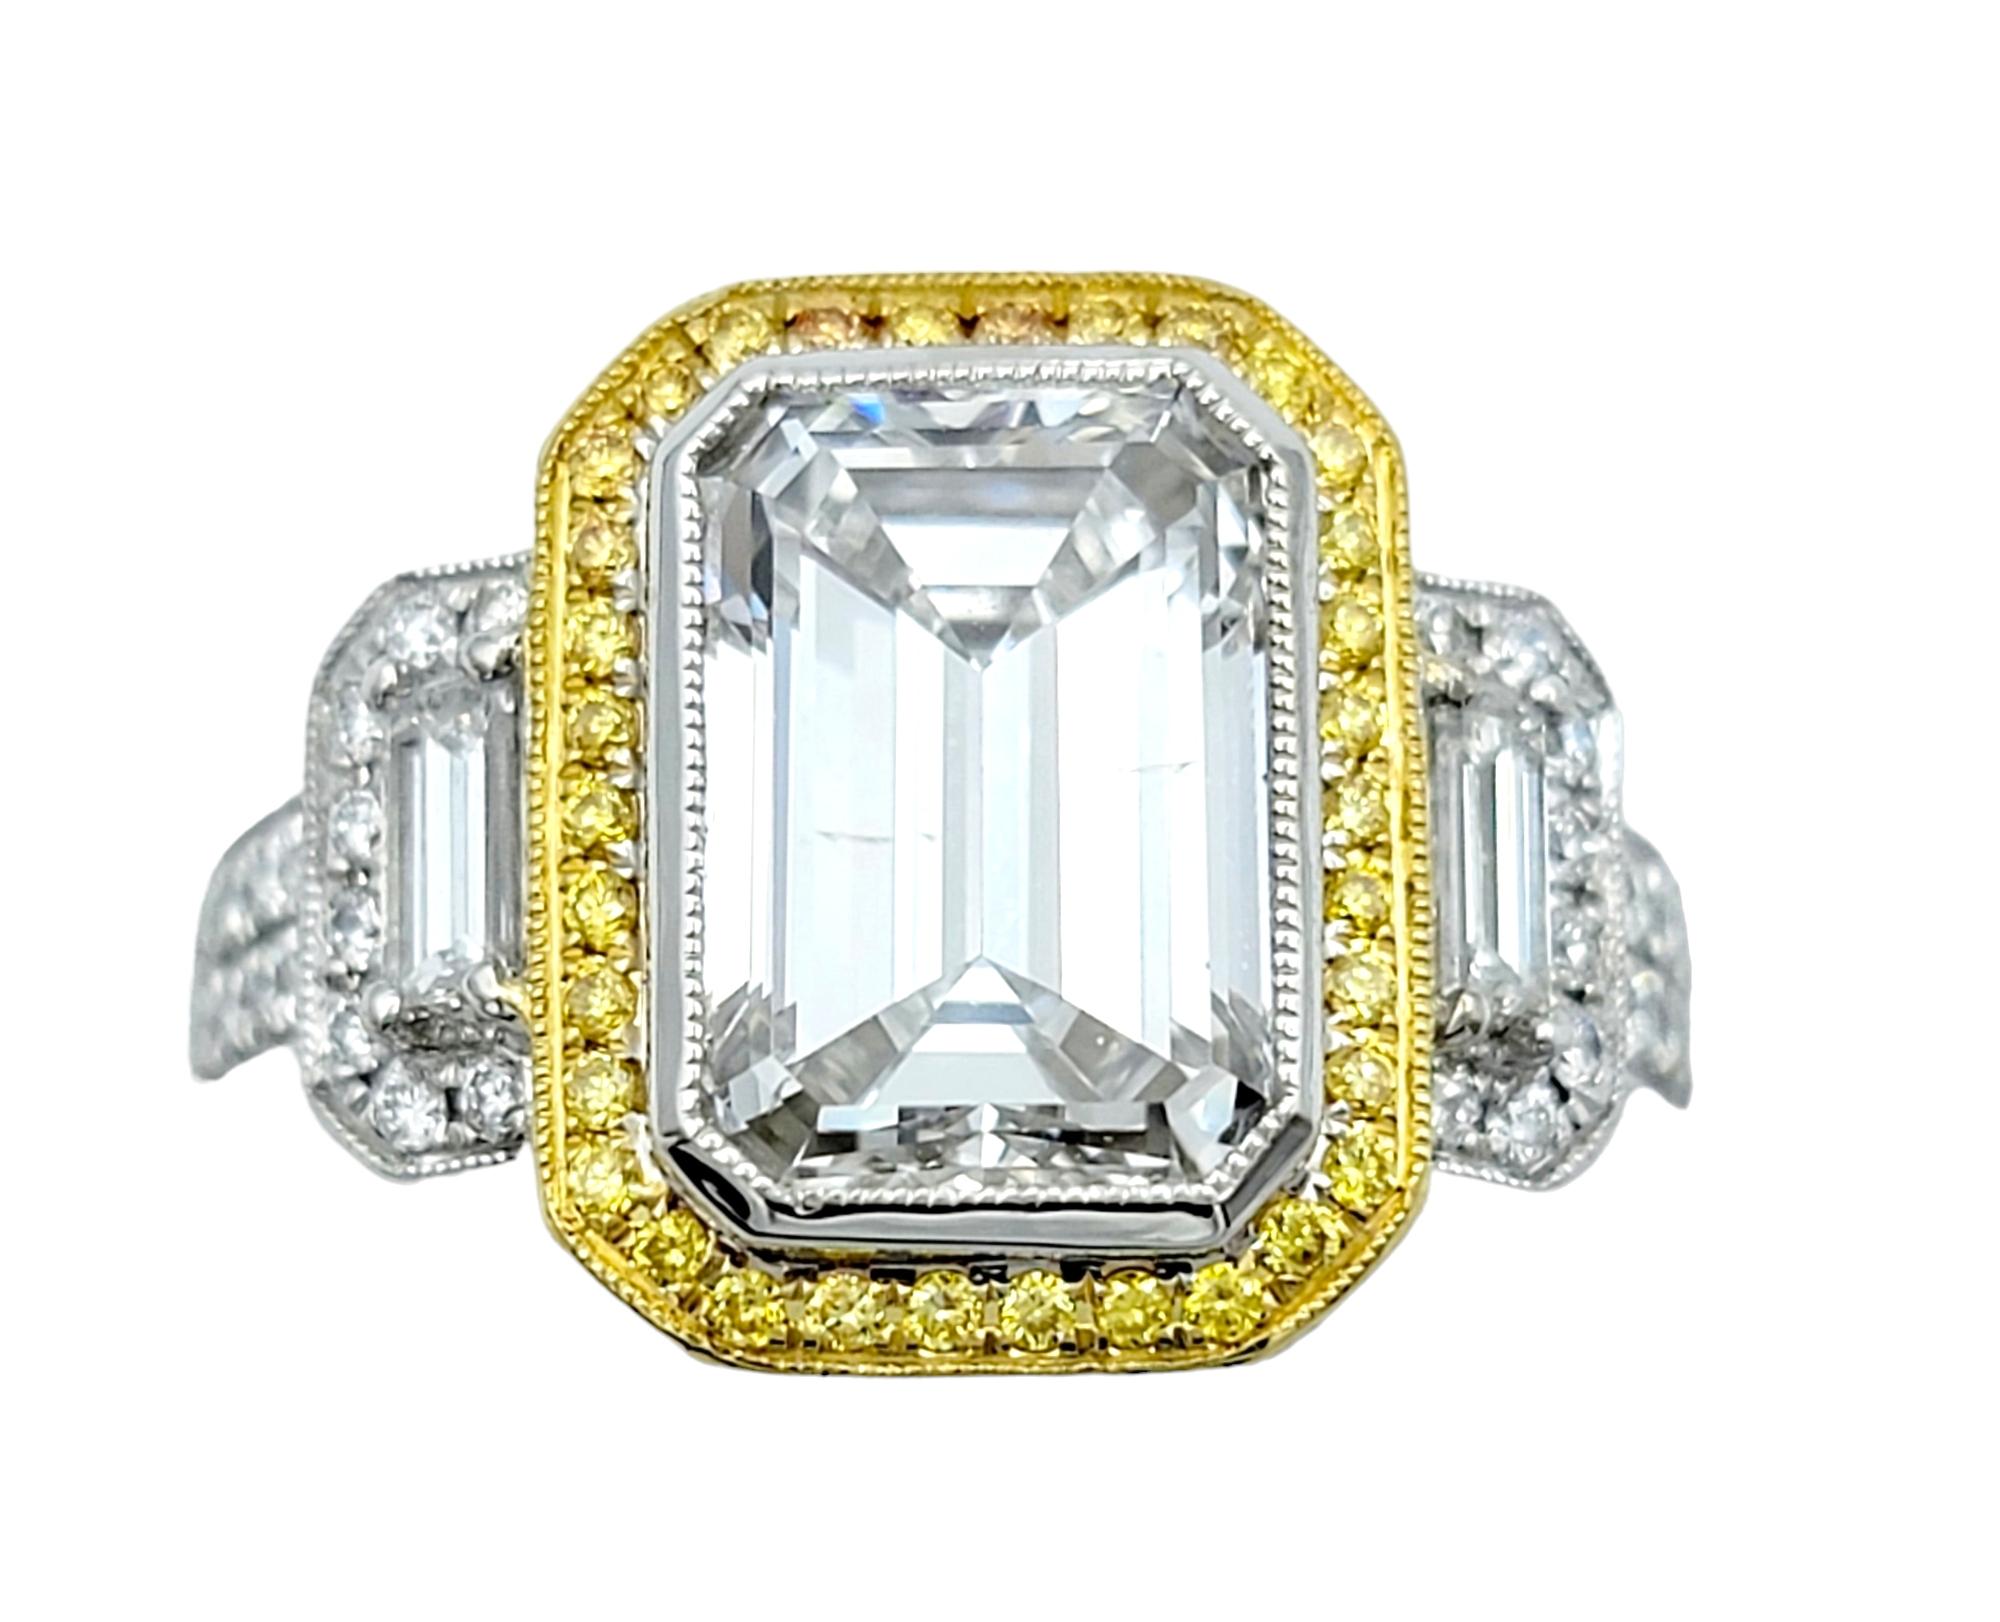 Ring Size: 6

This incredible Simon G. 3.50 carat emerald cut diamond engagement ring is an absolute masterpiece of jewelry design, merging classical elegance with contemporary charm. 

The striking centerpiece, an emerald-cut diamond, is